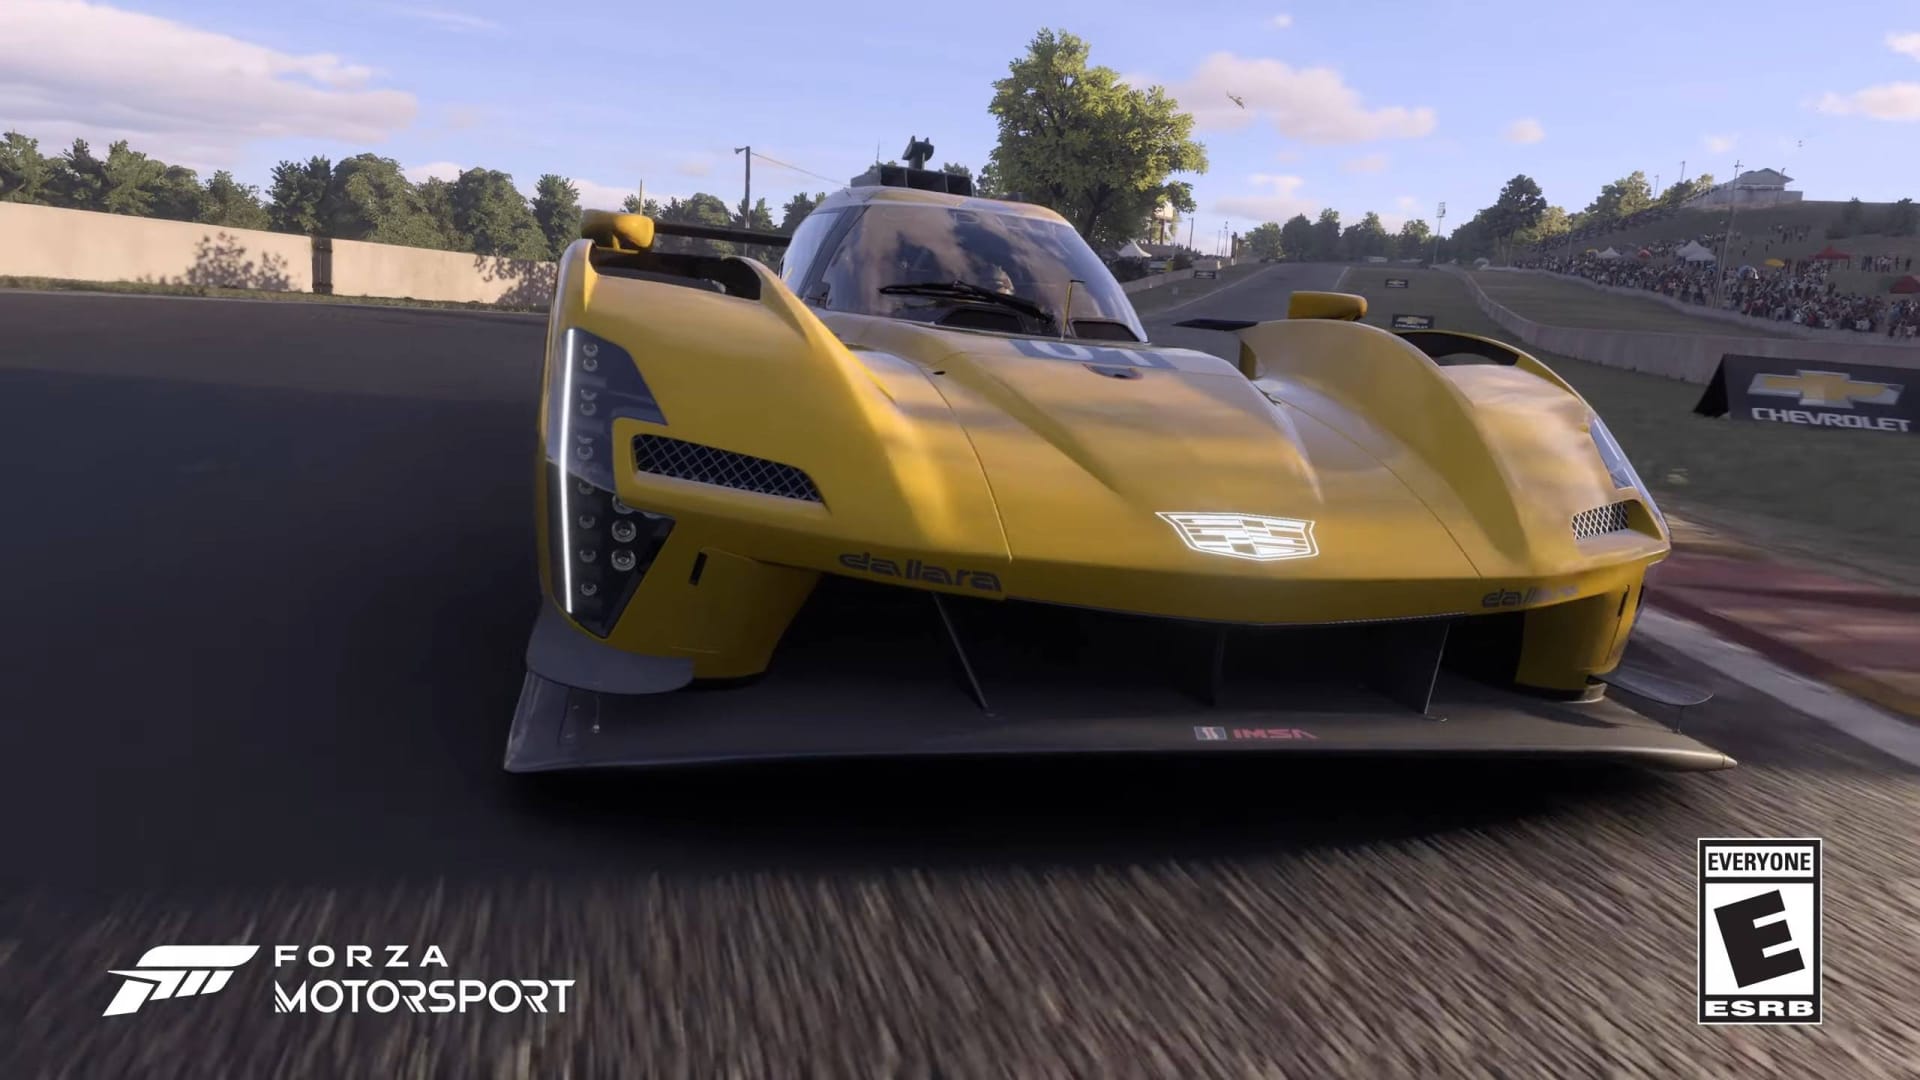 Forza Motorsport Reveals Three Tracks With New Trailers